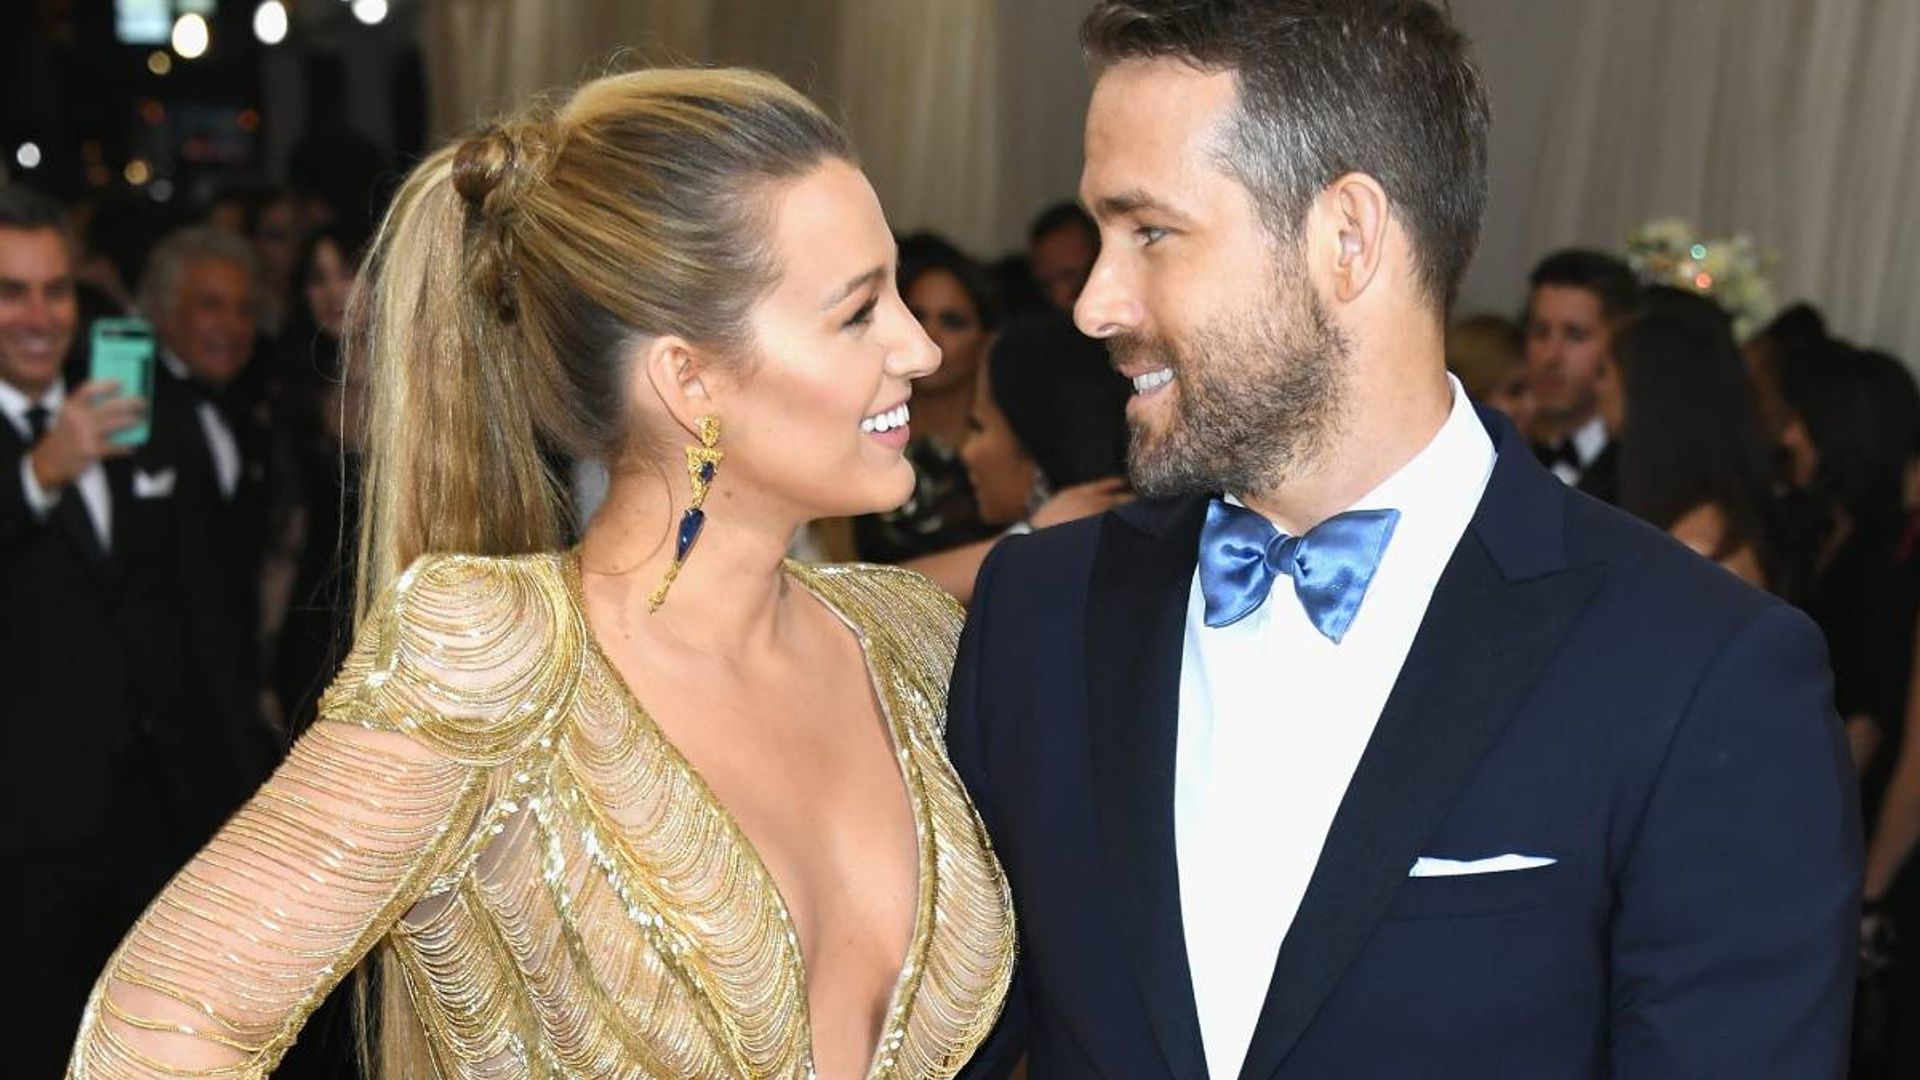 Blake Lively shares naughty NSFW special message for Ryan Reynolds 